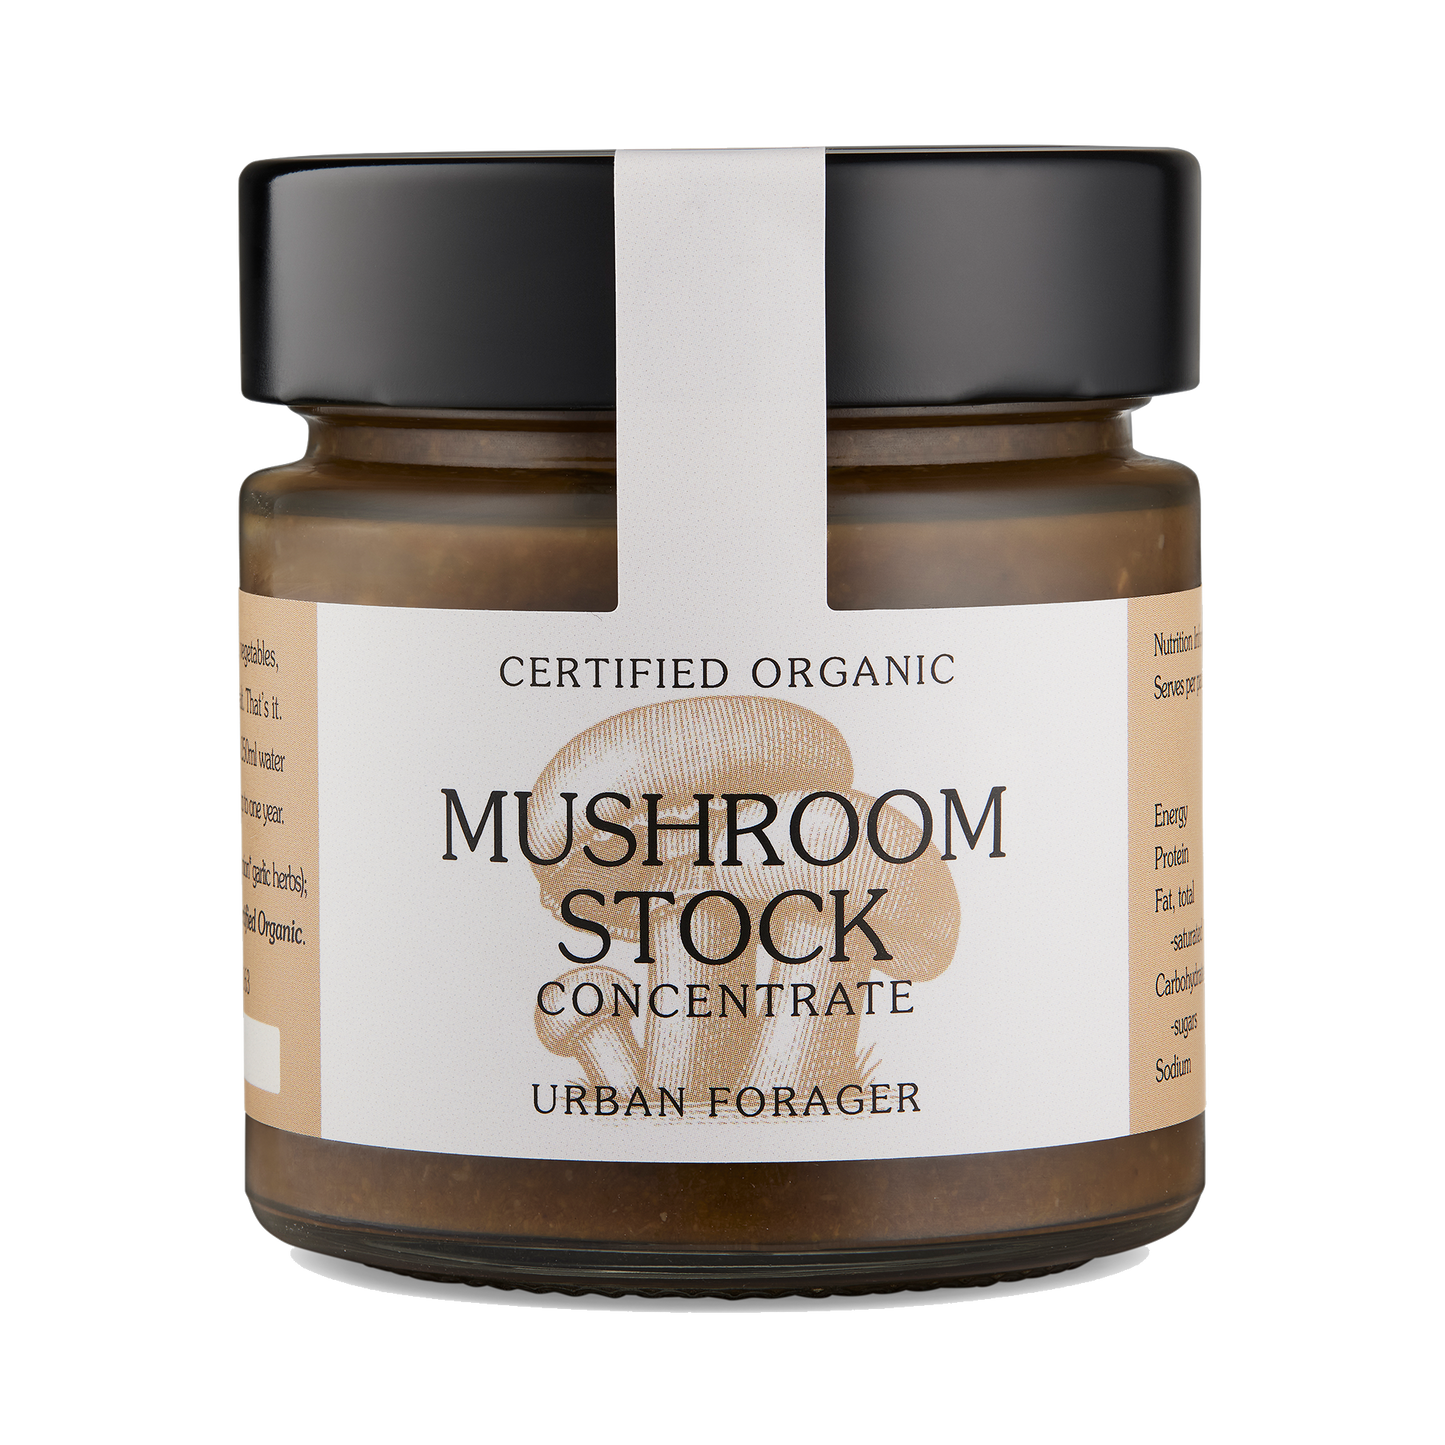 Urban Forager Stock Concentrate Mushroom 250g, Australian & Certified Organic